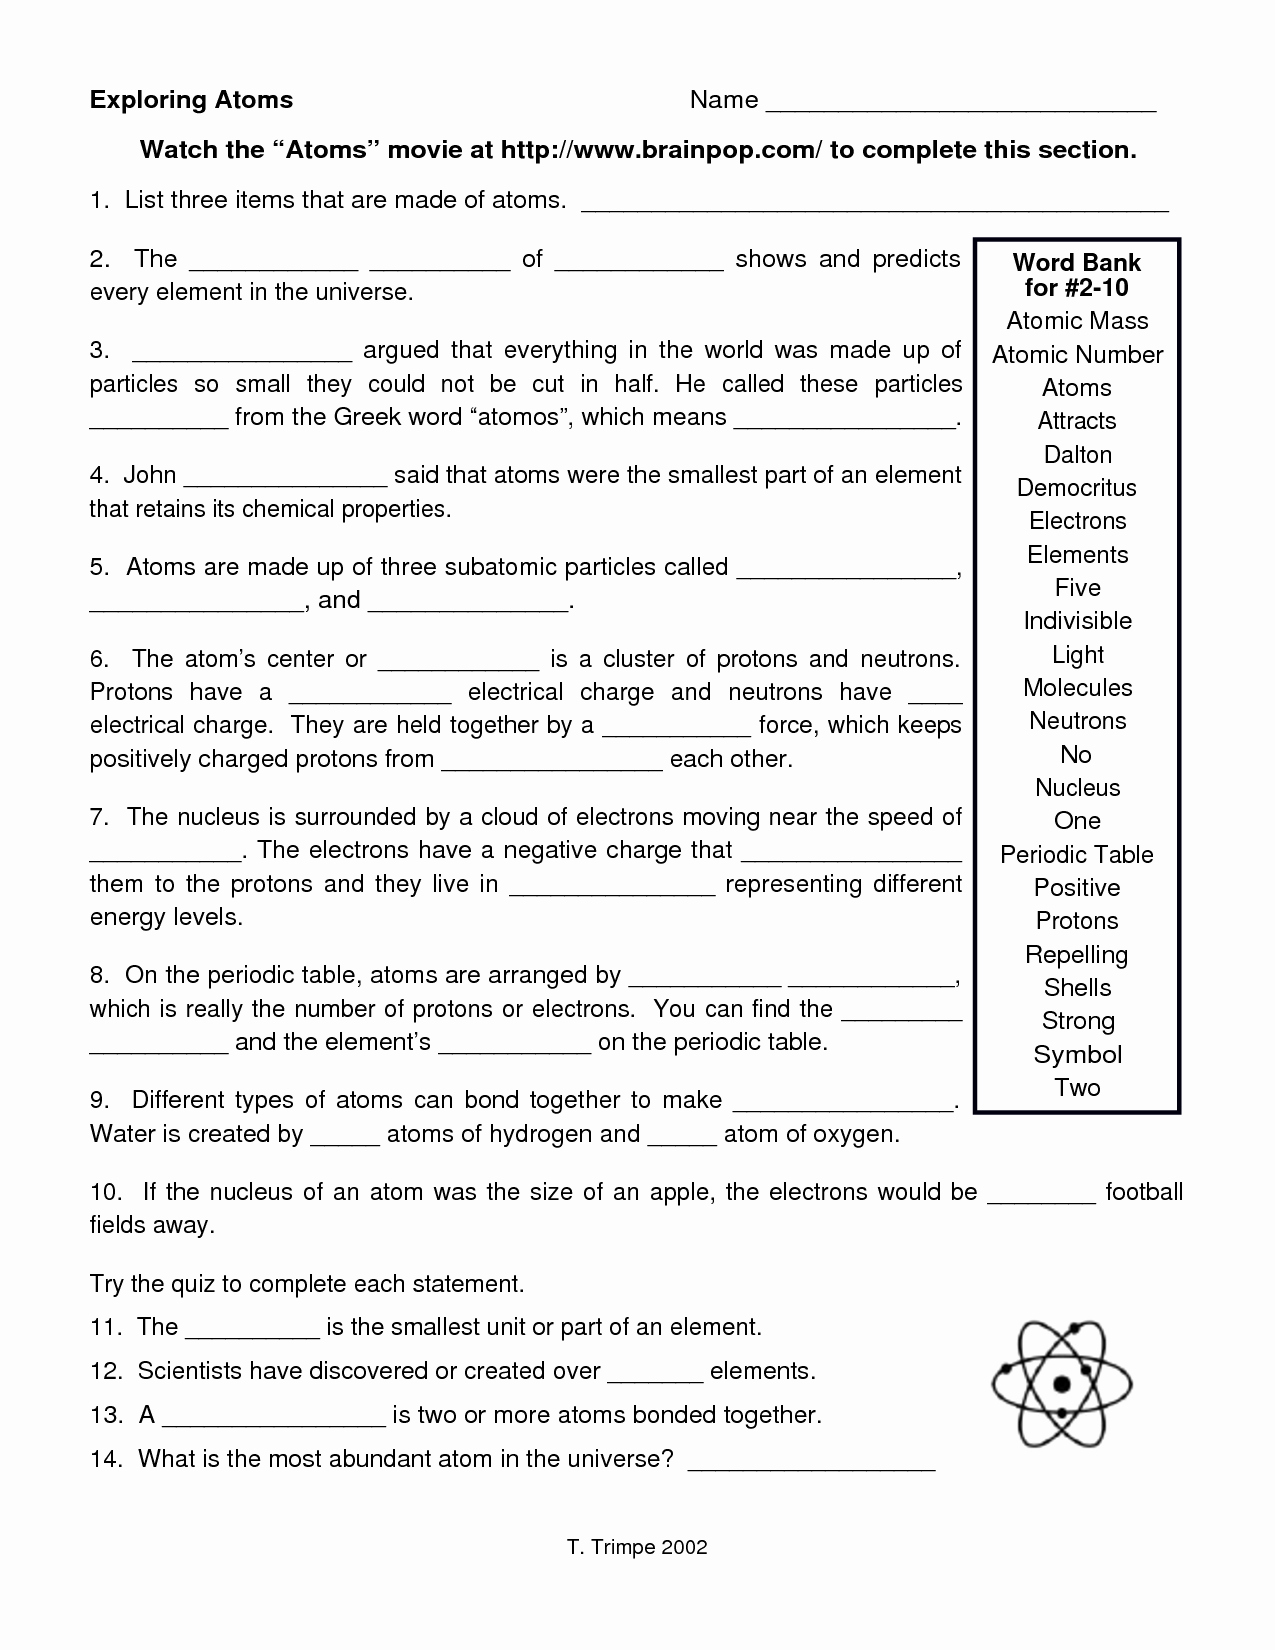 Atoms and isotopes Worksheet Answers Inspirational 16 Best Of Molecules and atoms Worksheet Answer Key